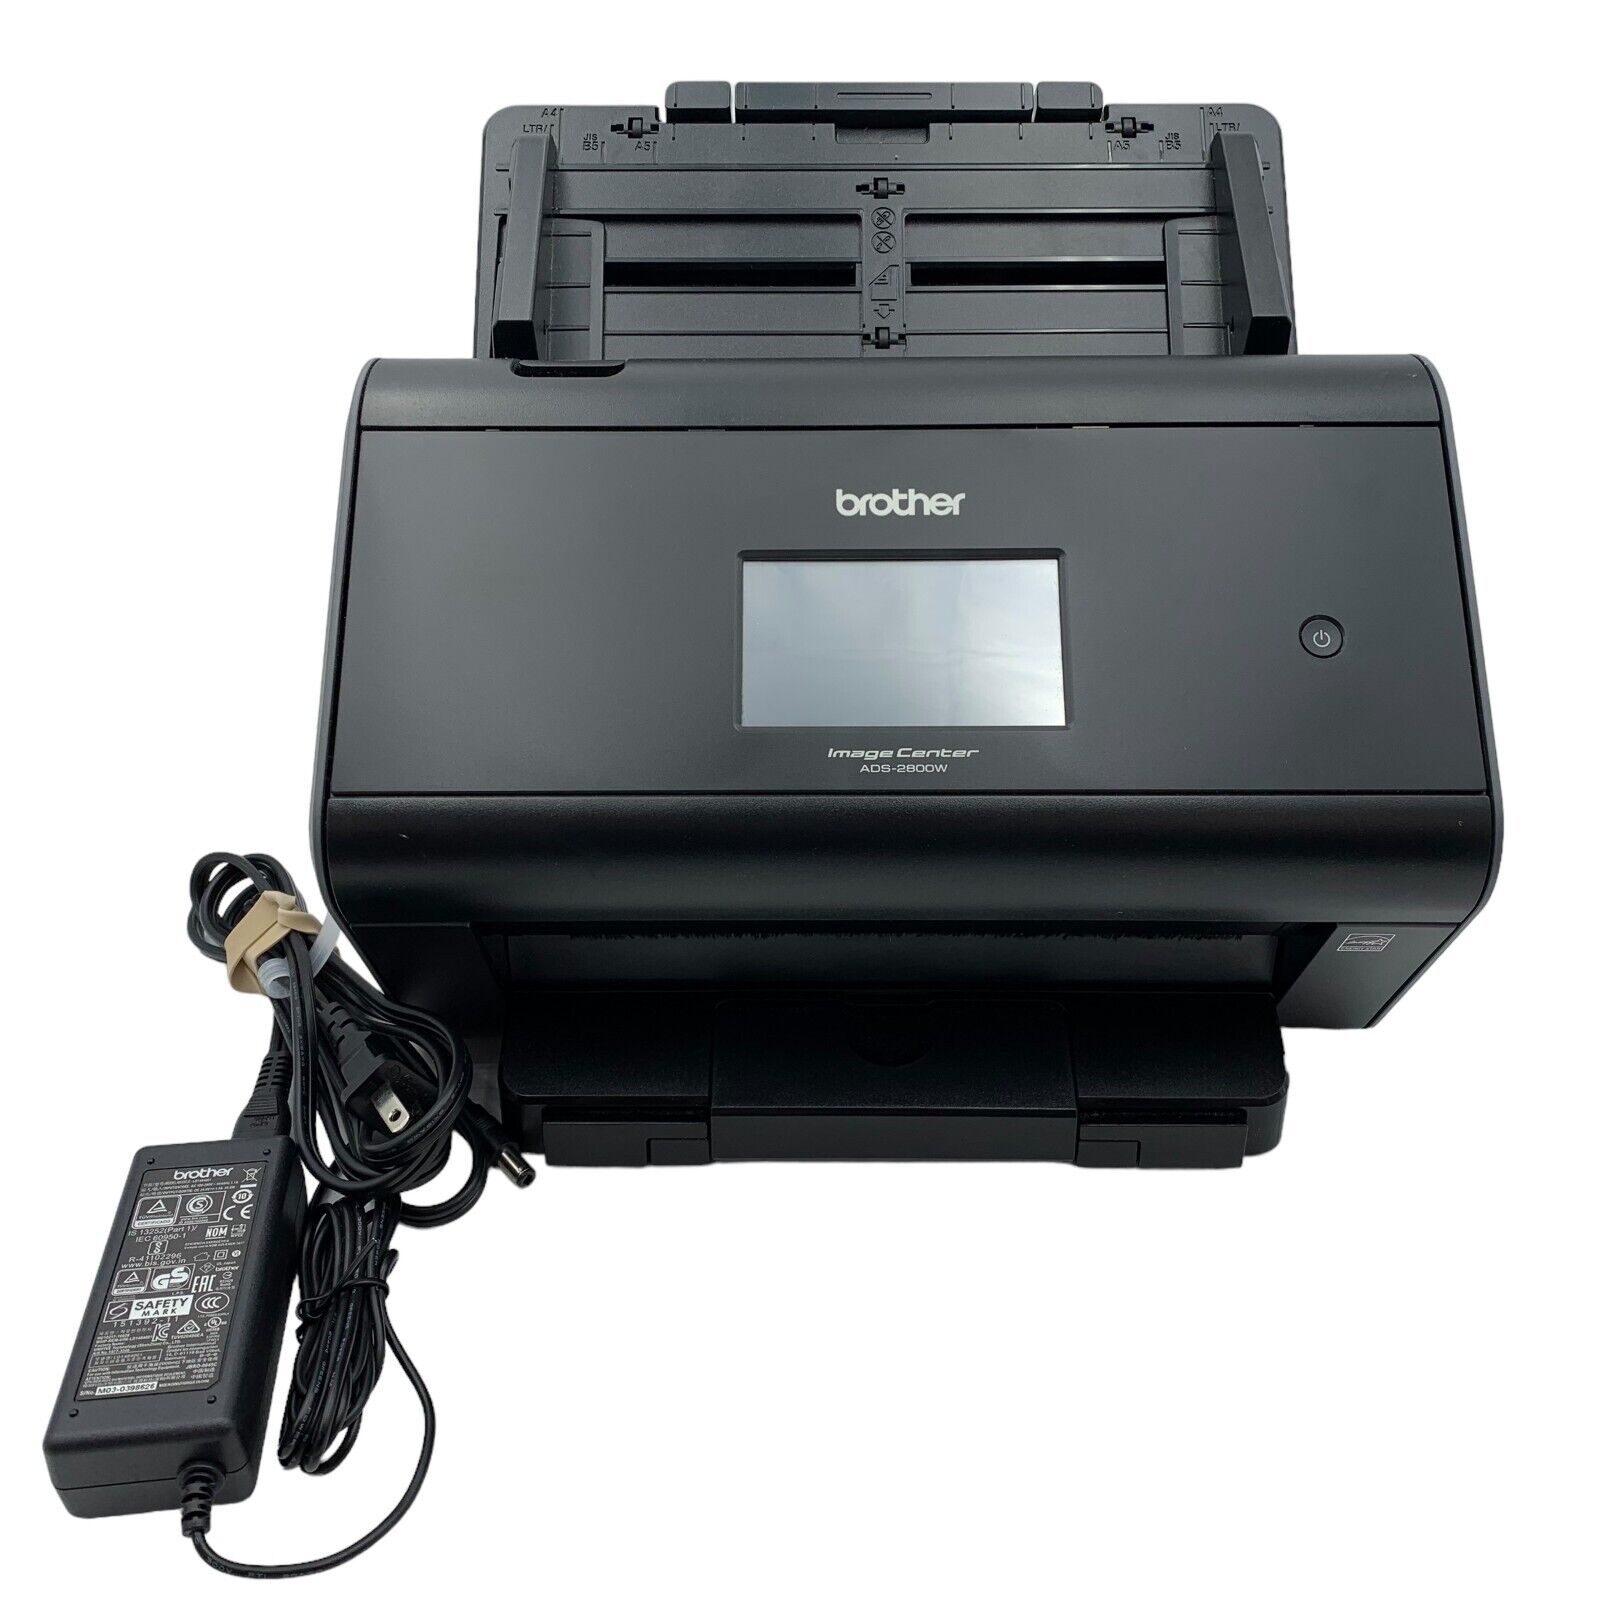 Brother ADS-2800W Wireless Document Scanner with AC Adapter